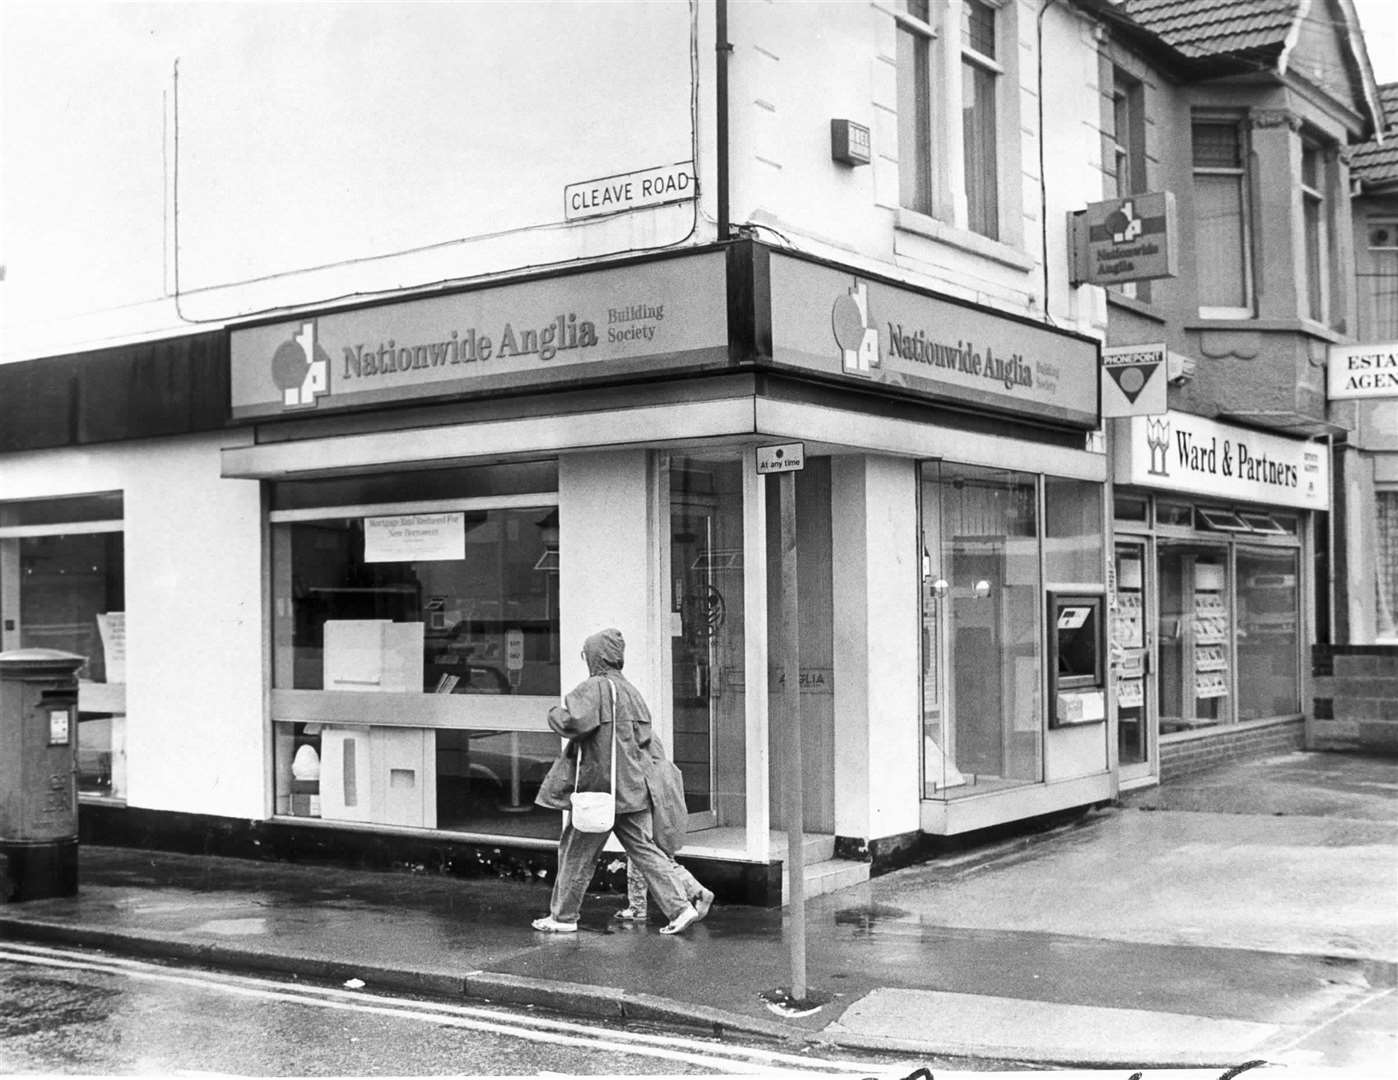 The Nationwide Anglia Building Society in Watling Street, Gillingham, on July 31, 1991. The building is now home to Medway Park Veterinary Centre